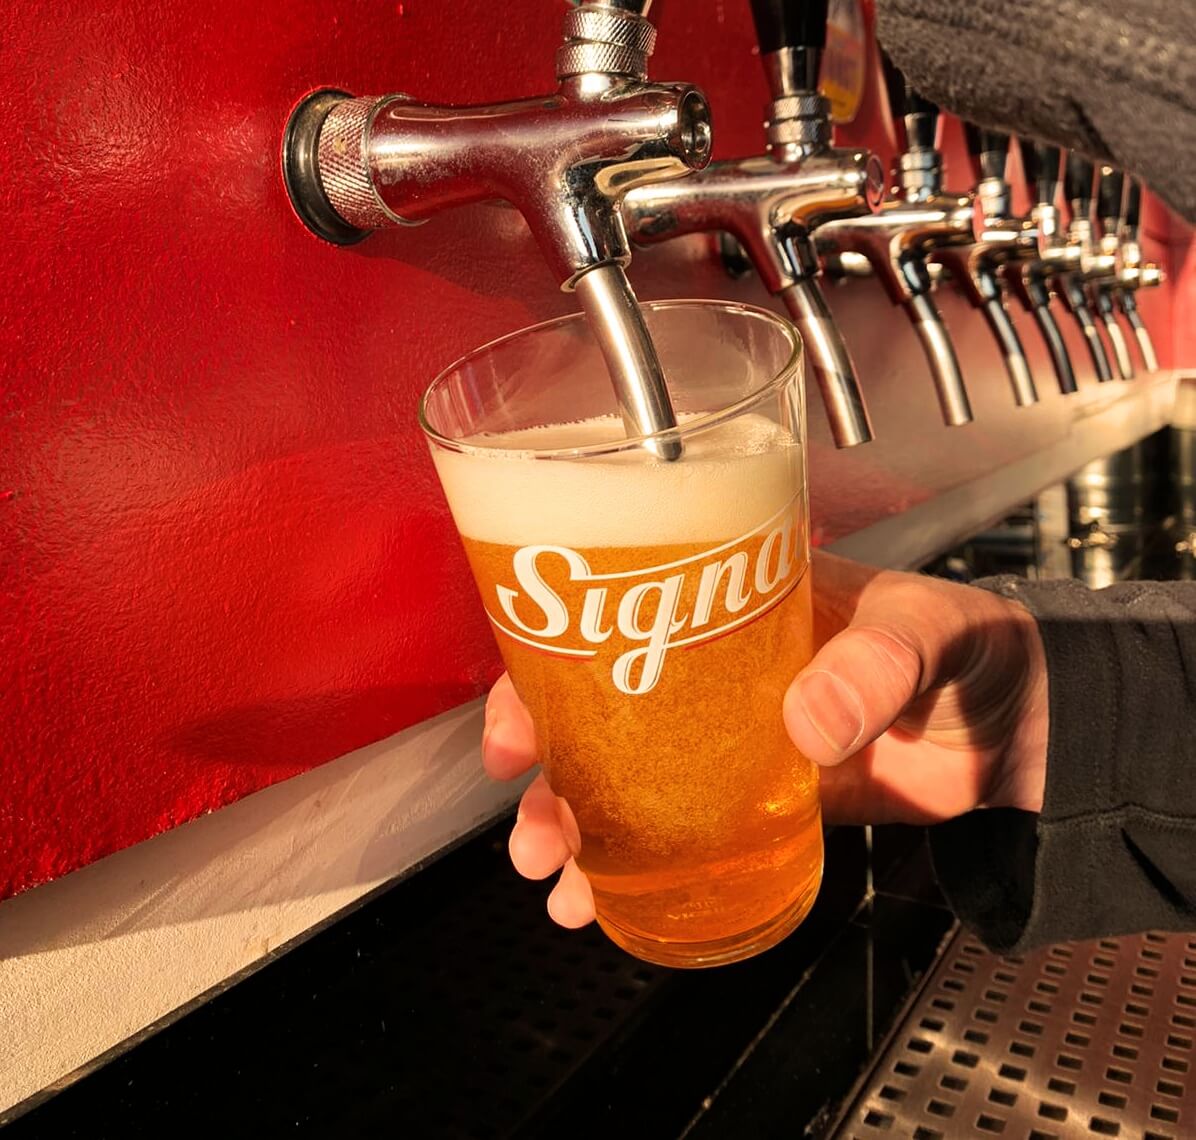 Freshly poured beer at Signal Brewery's Taproom bar, Croydon, South London